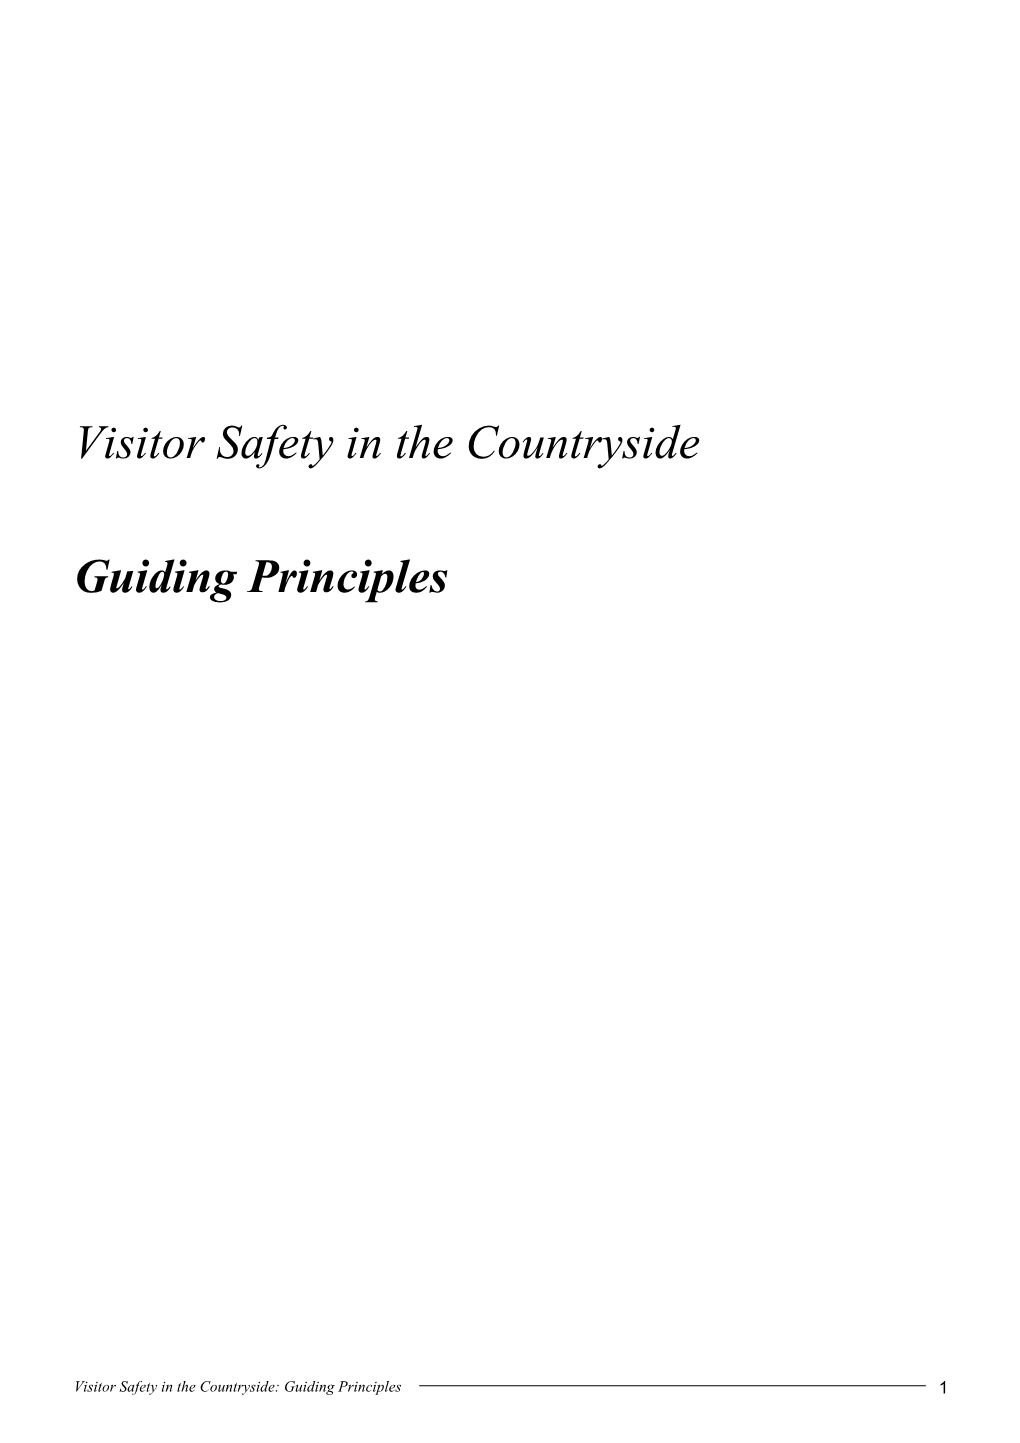 Visitor Safety in the Countryside: Draft Guiding Principles